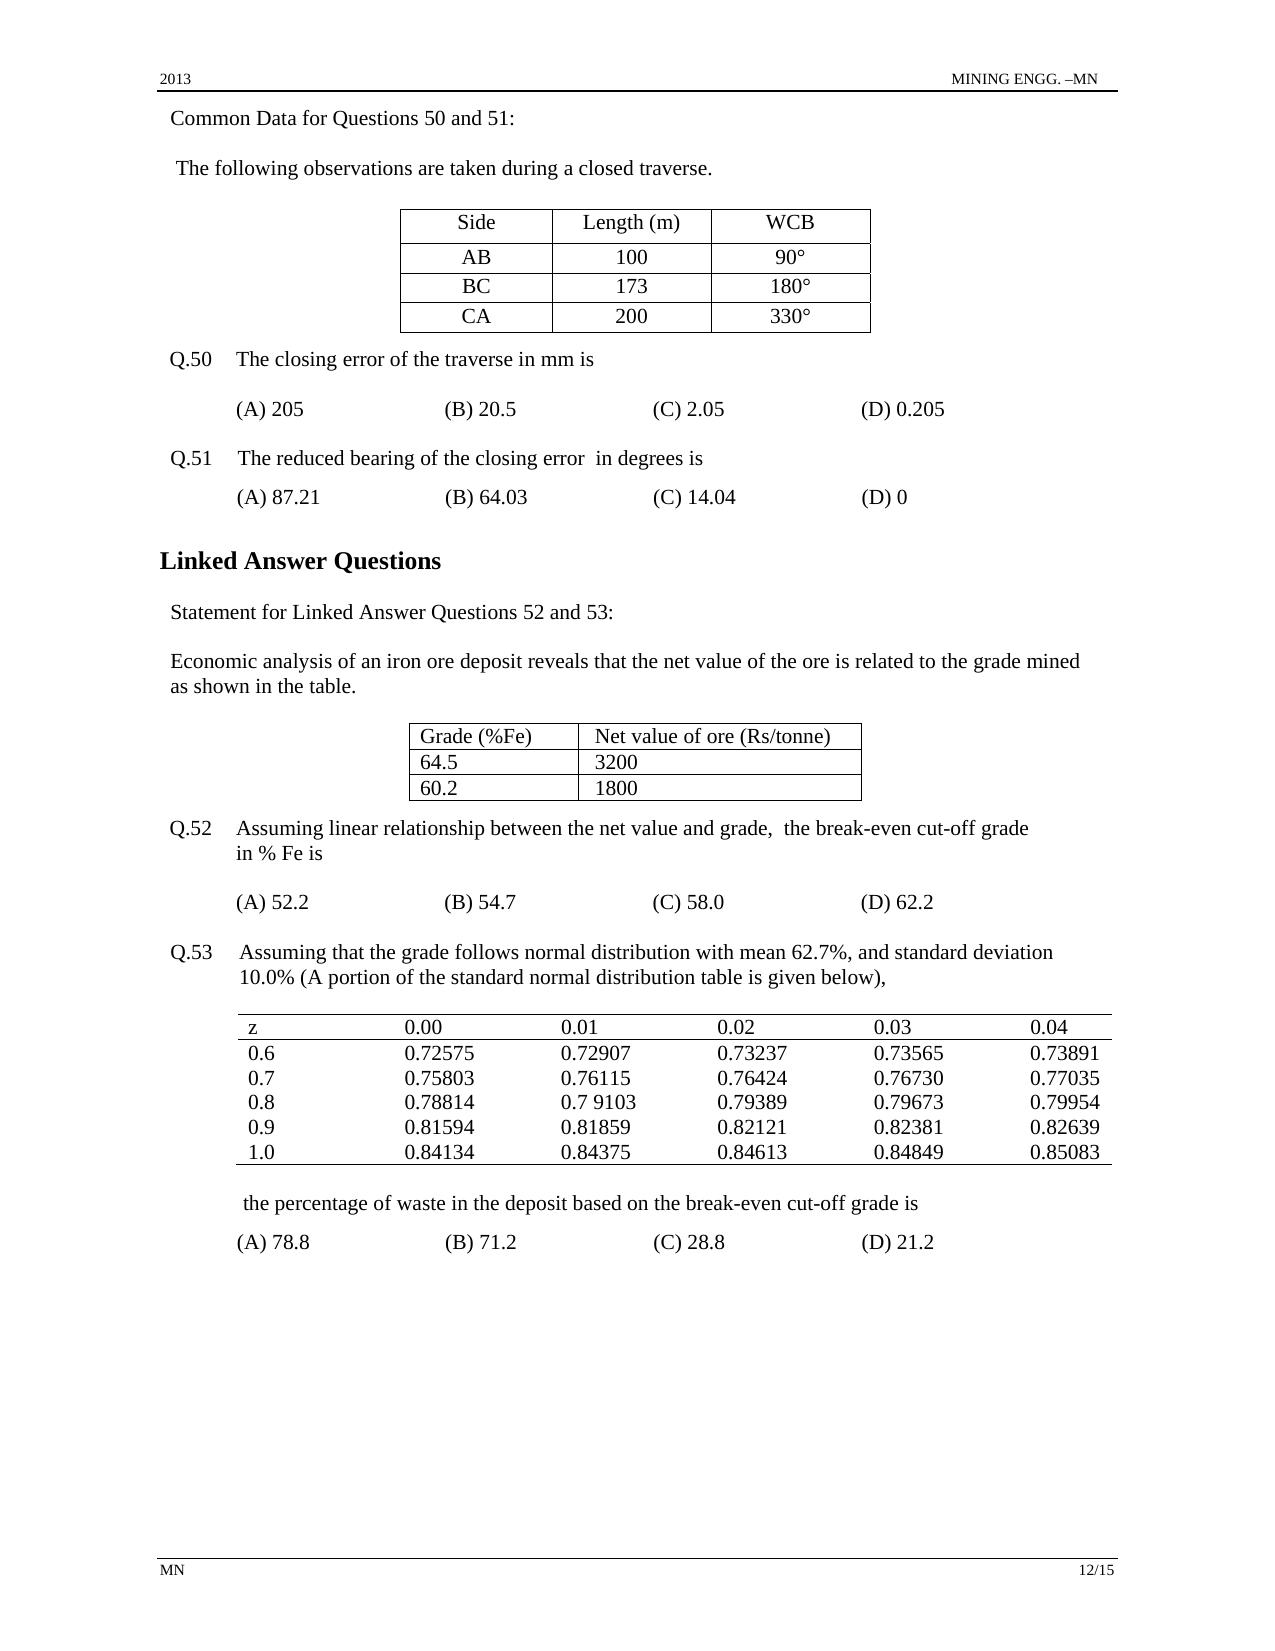 GATE 2013 Mining Engineering (MN) Question Paper with Answer Key - Page 12